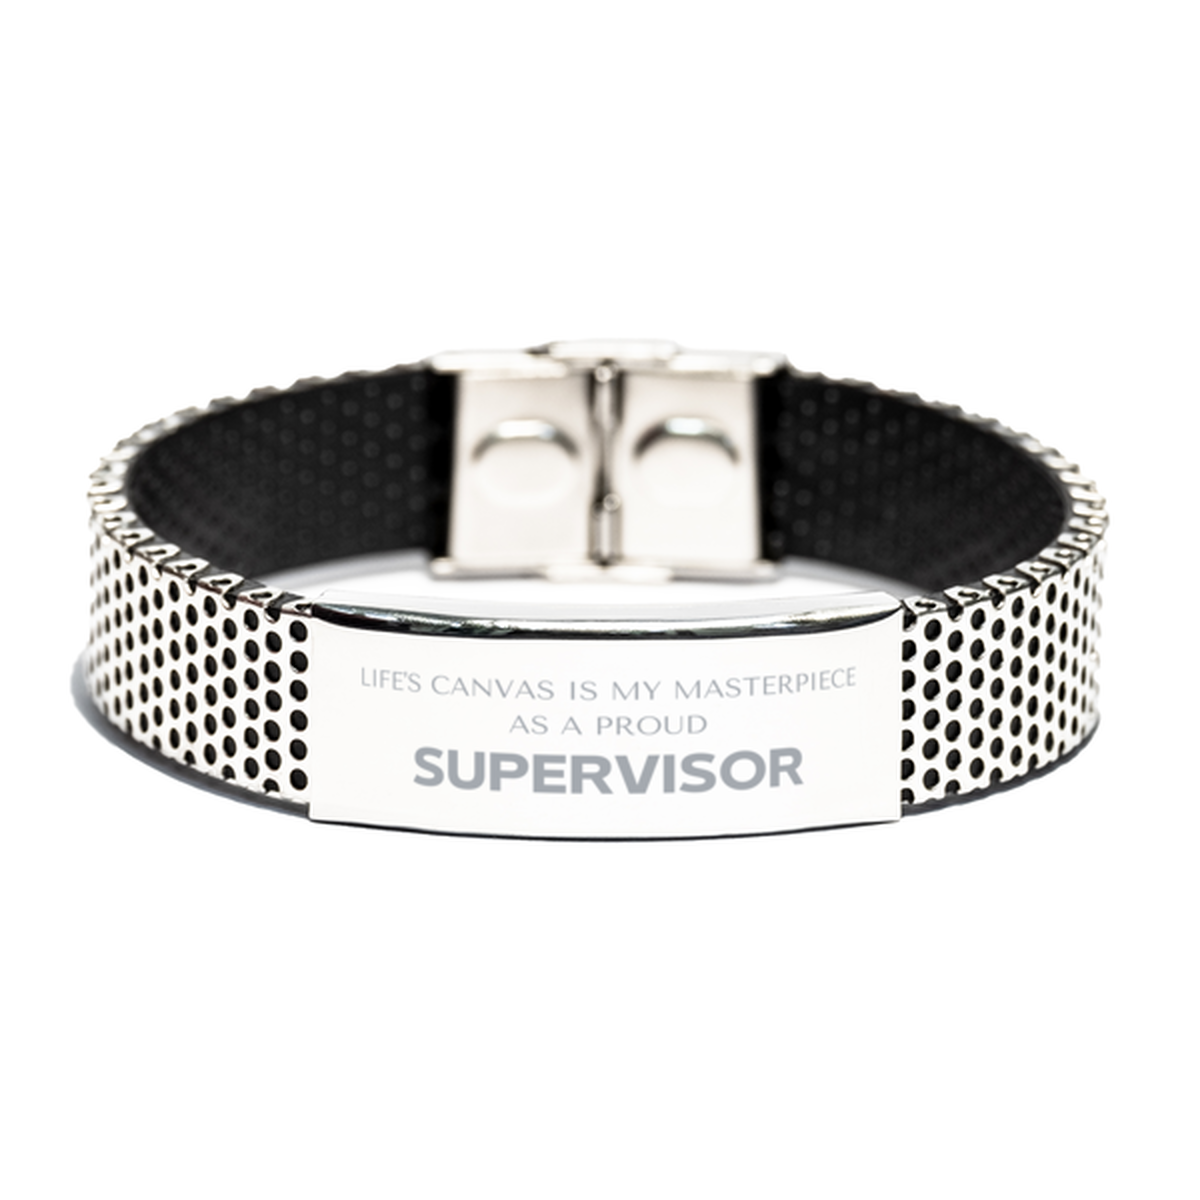 Proud Supervisor Gifts, Life's canvas is my masterpiece, Epic Birthday Christmas Unique Stainless Steel Bracelet For Supervisor, Coworkers, Men, Women, Friends